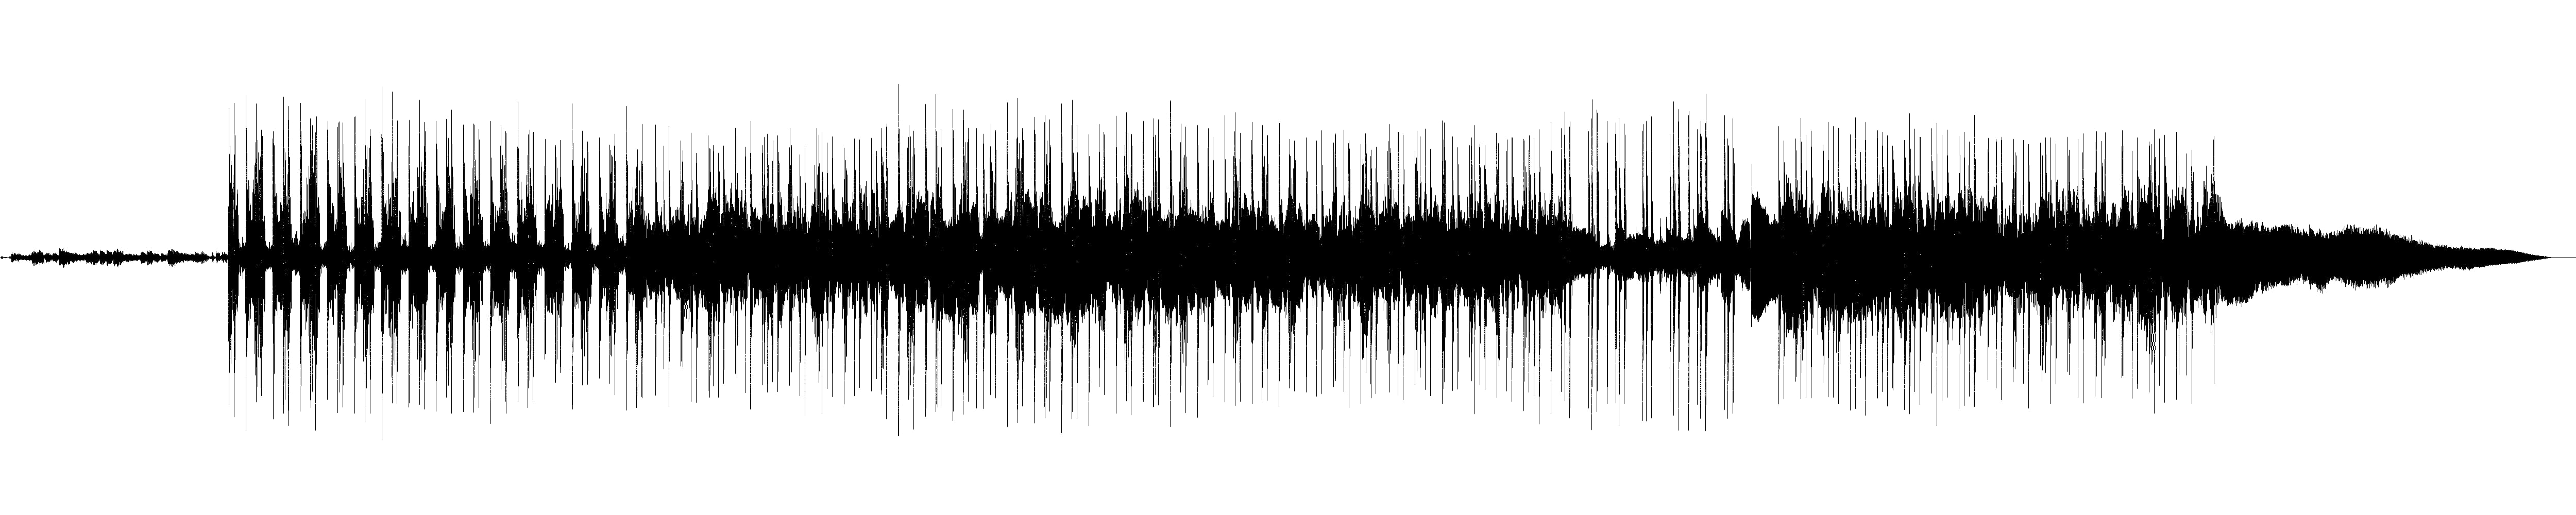 Example 1: Lowpassed Waveform of a song 3x